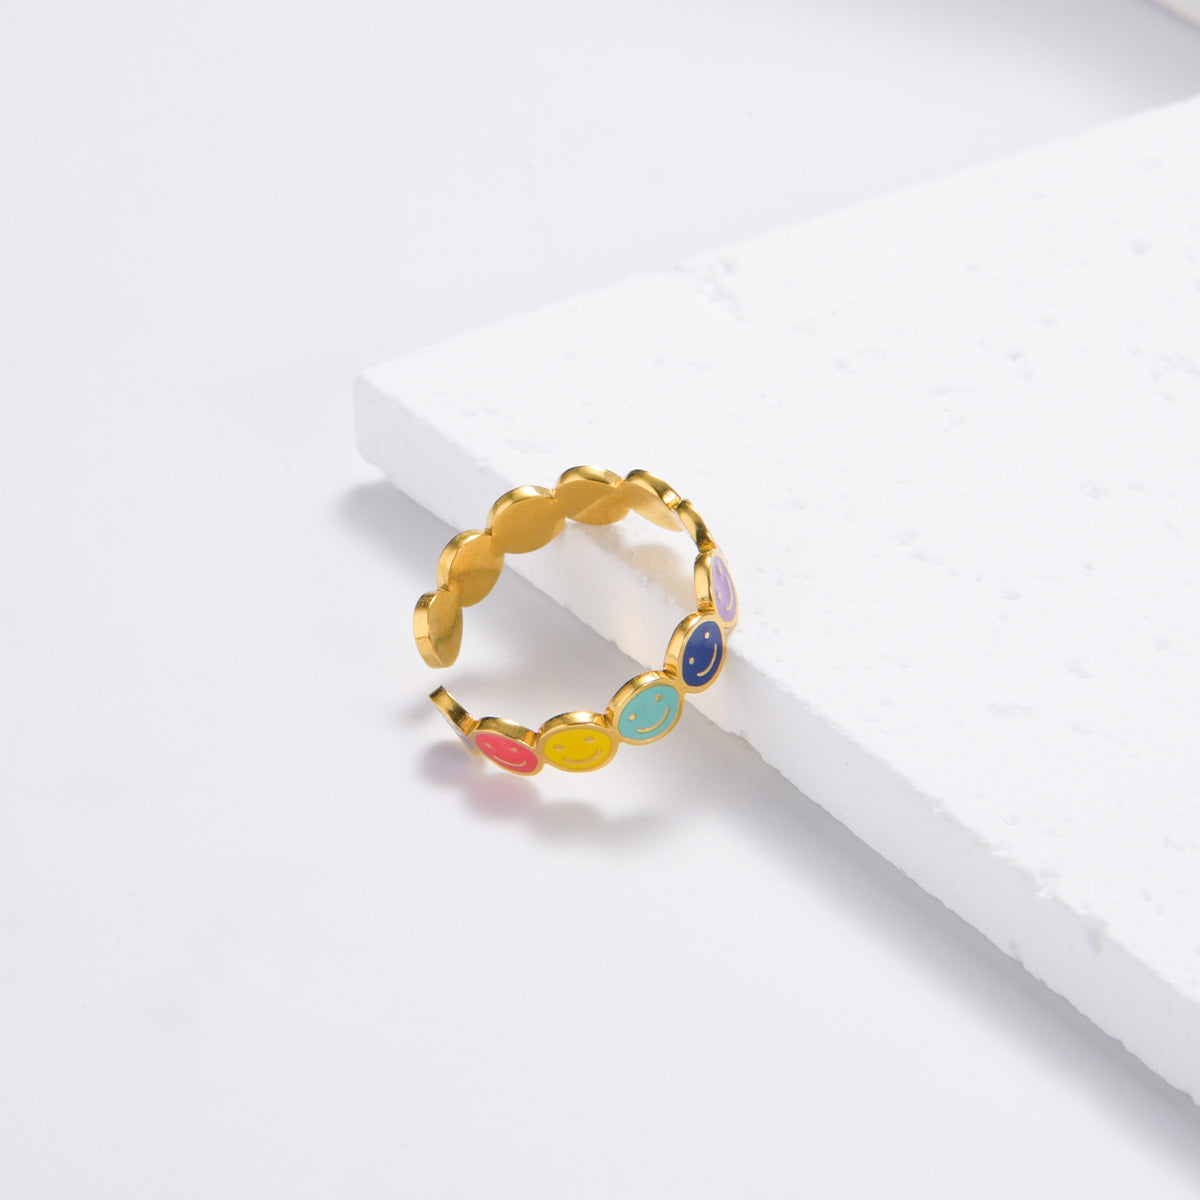 Adorable happy face multicolor ring in gold